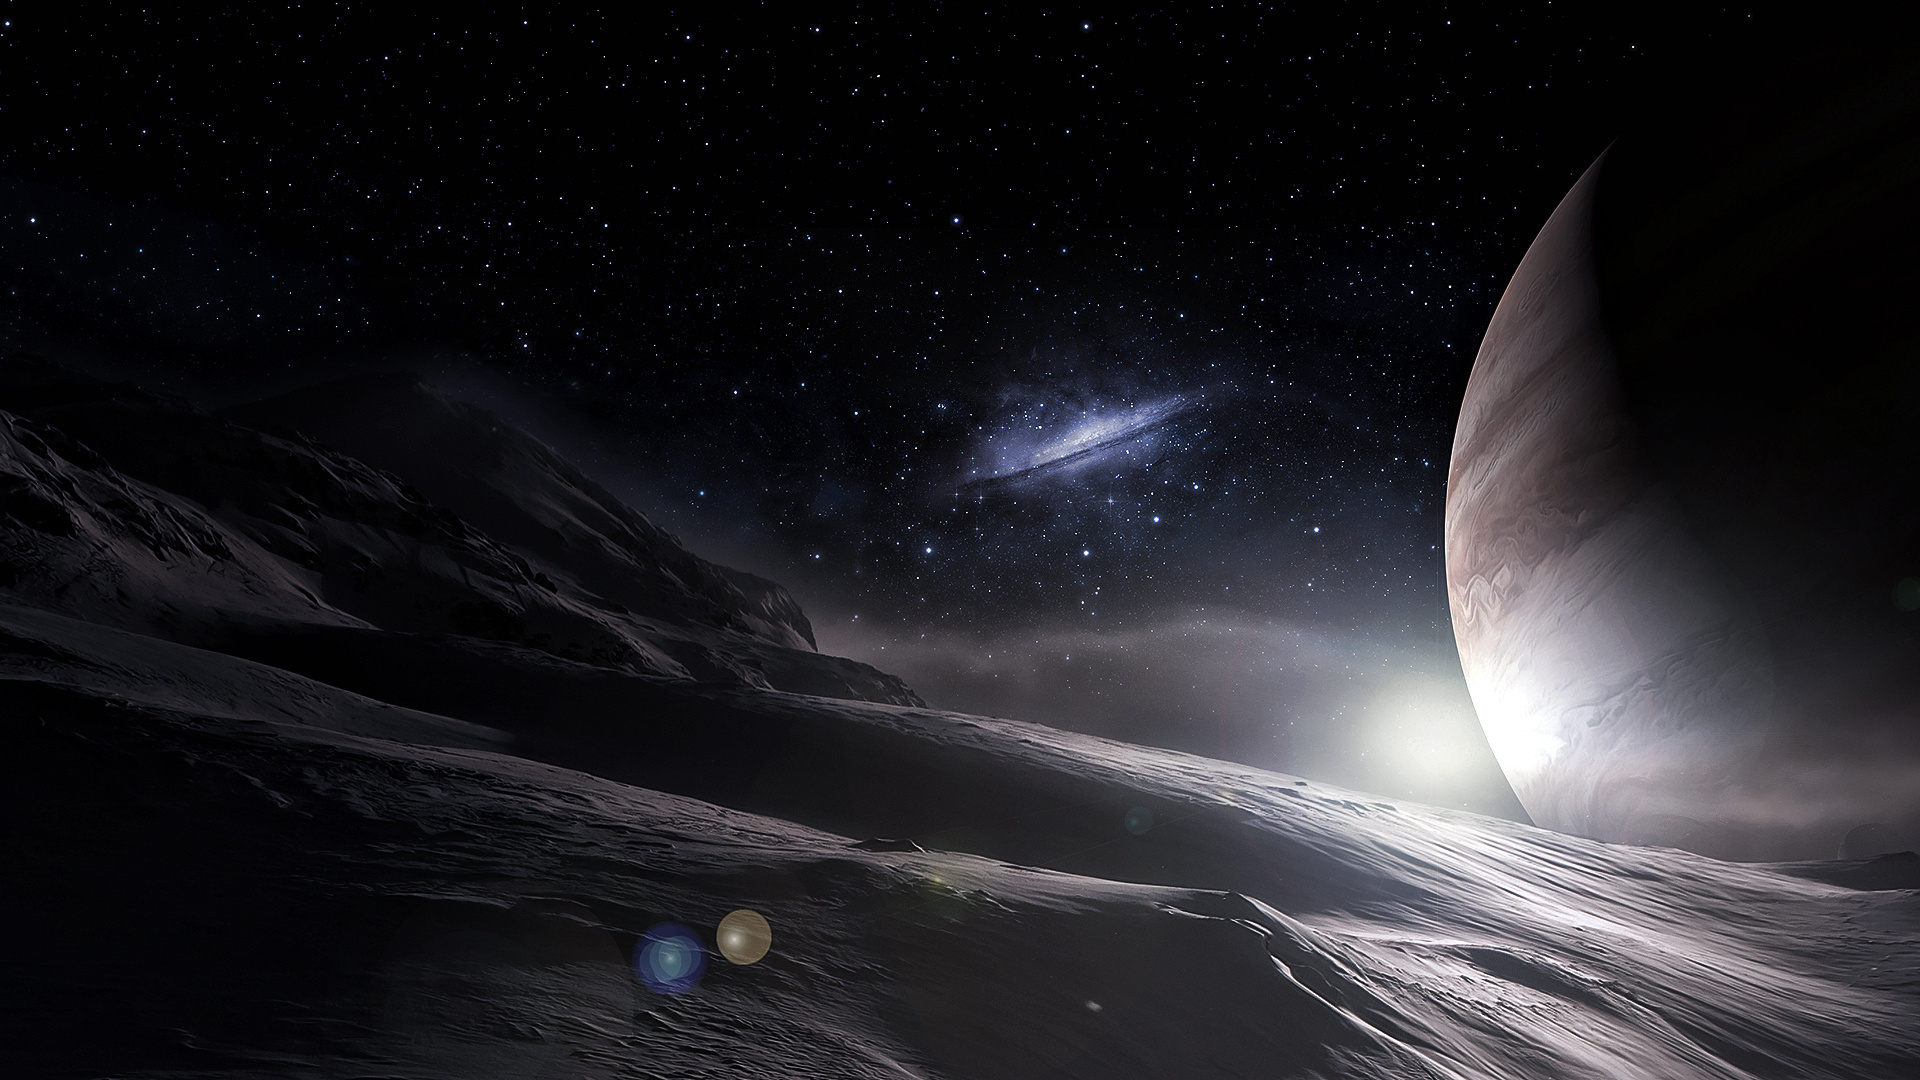 sc, Fi, Science, Planets, Landscapes, Space, Stars, Galaxies, Planetscape, Reflection, Light, Cg, Digital, Sun, Moon Wallpaper